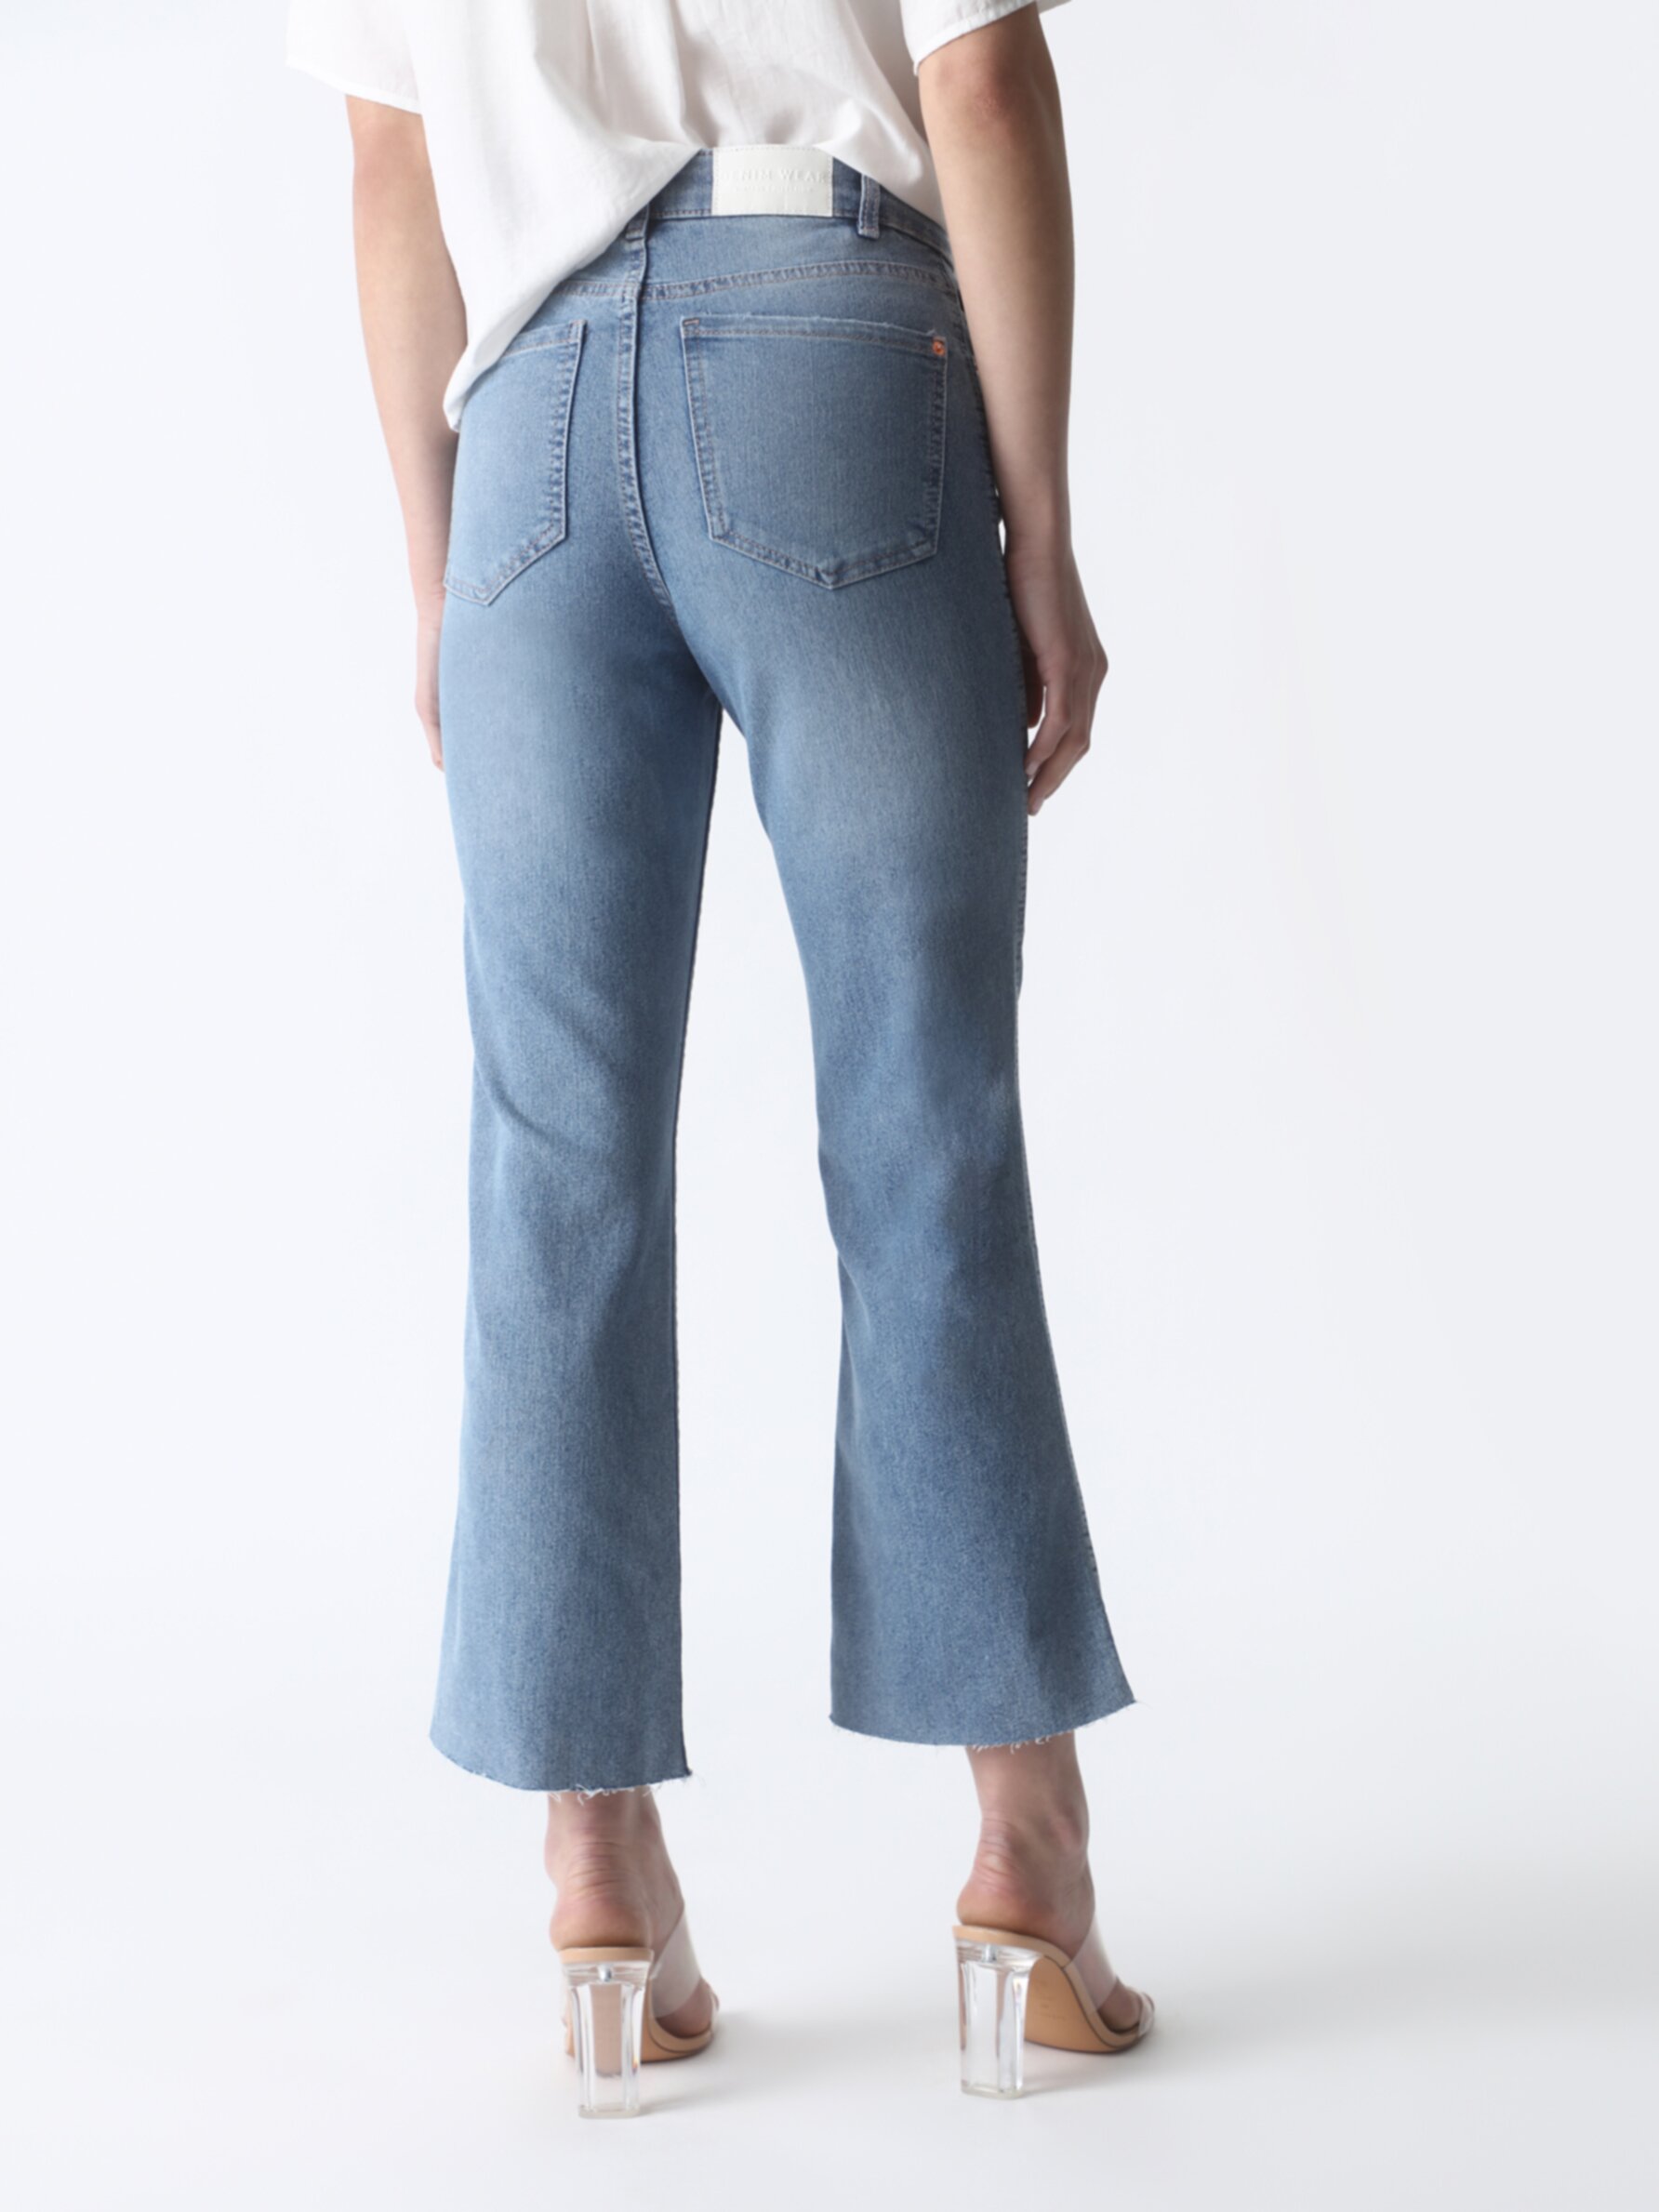 Mini flared jeans - Flared - Jeans - CLOTHING - Woman 